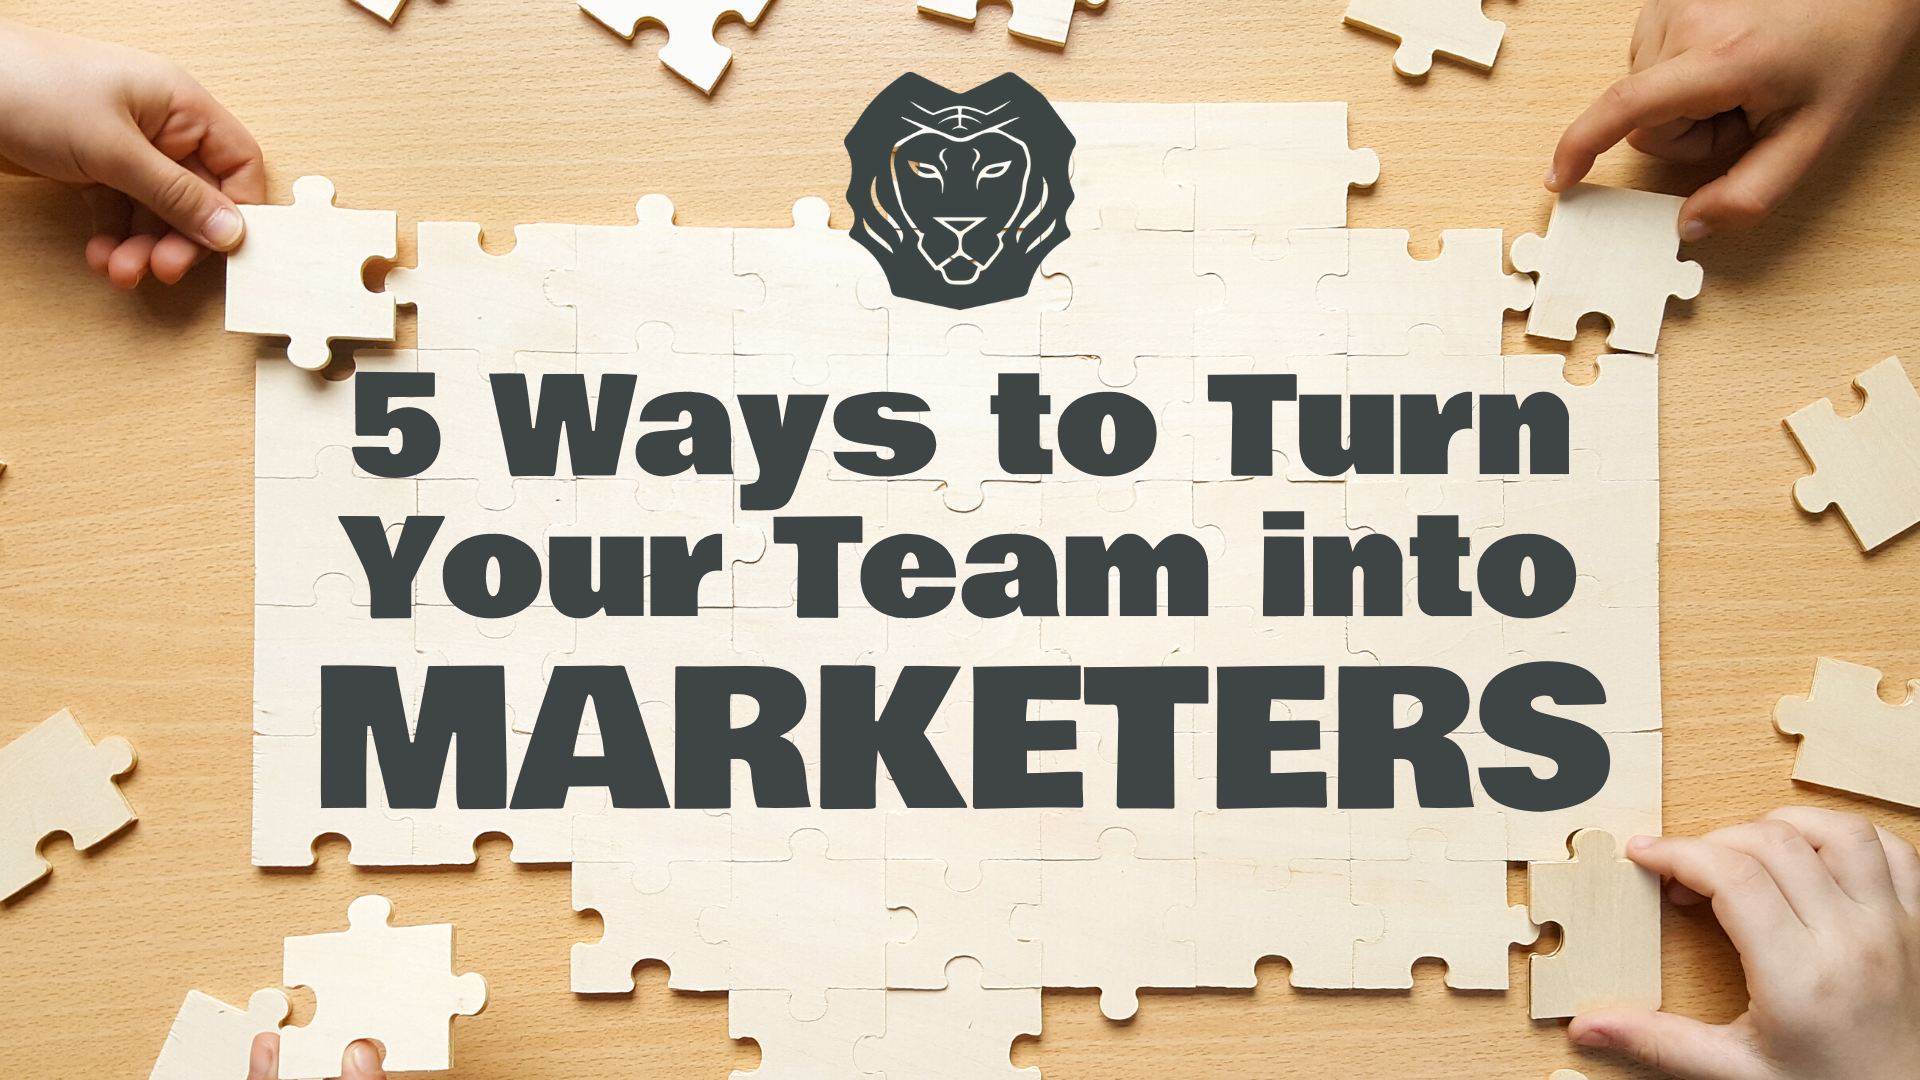 5 Ways to Turn Your Team into Marketers